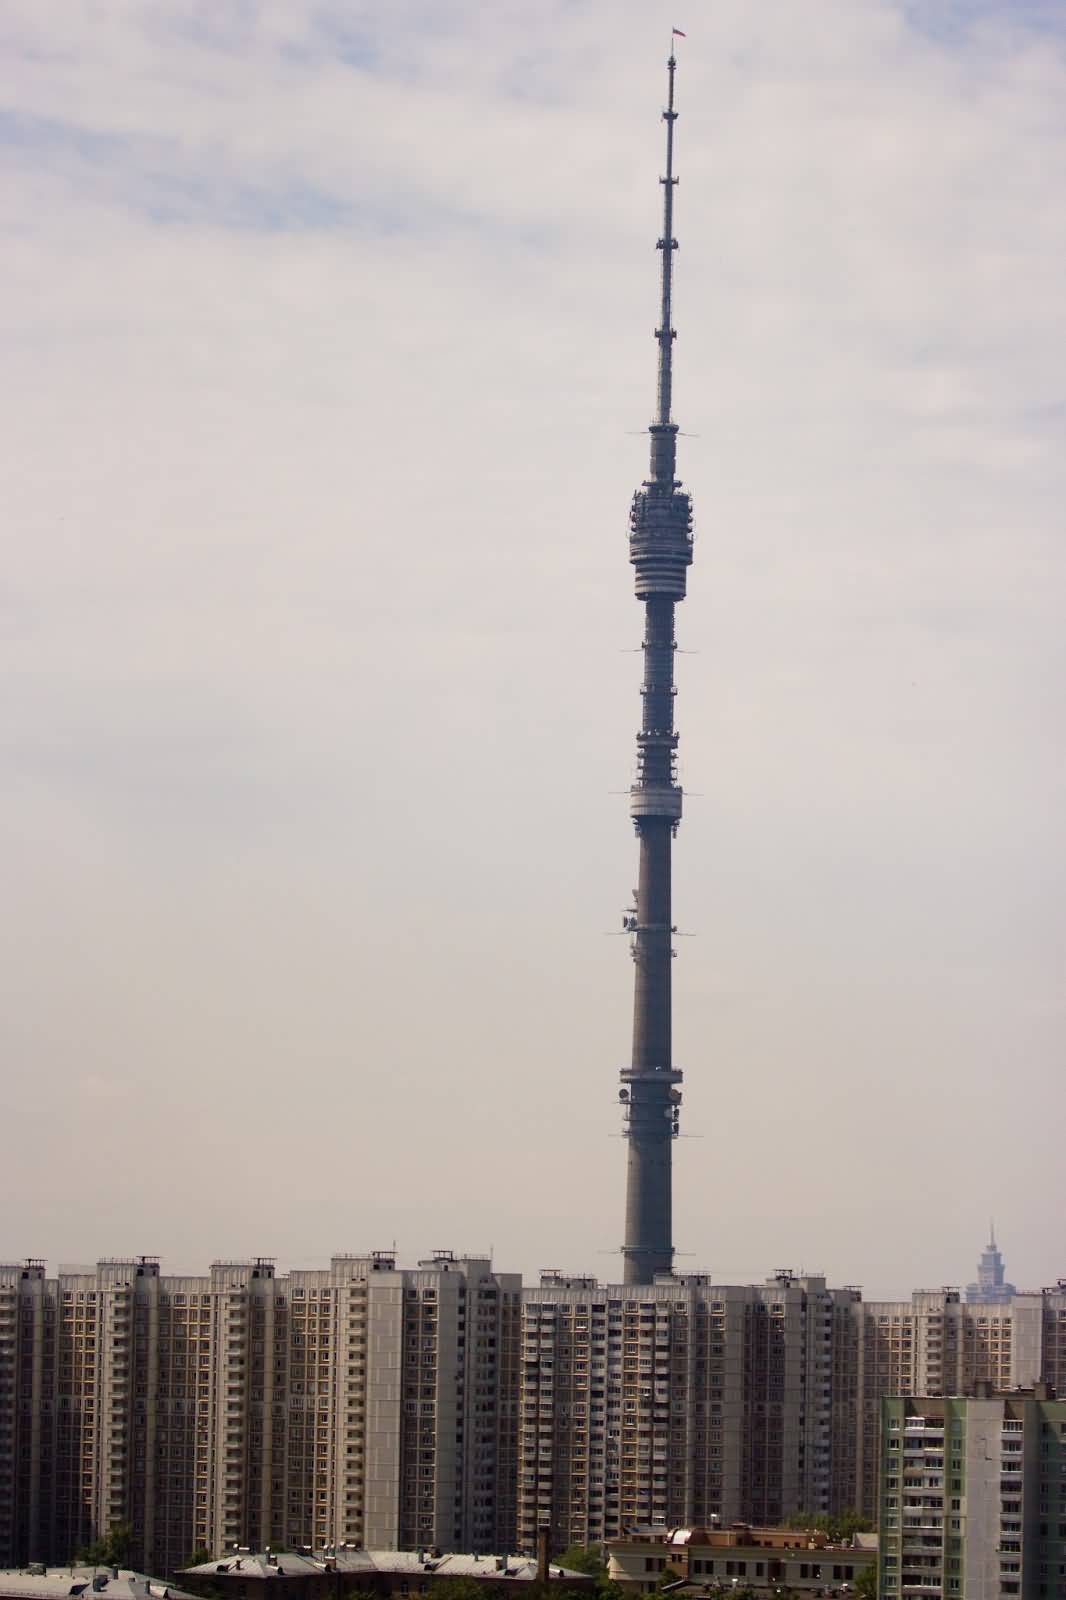 Comparison Of Ostankino Tower With Other Buildings Of Moscow